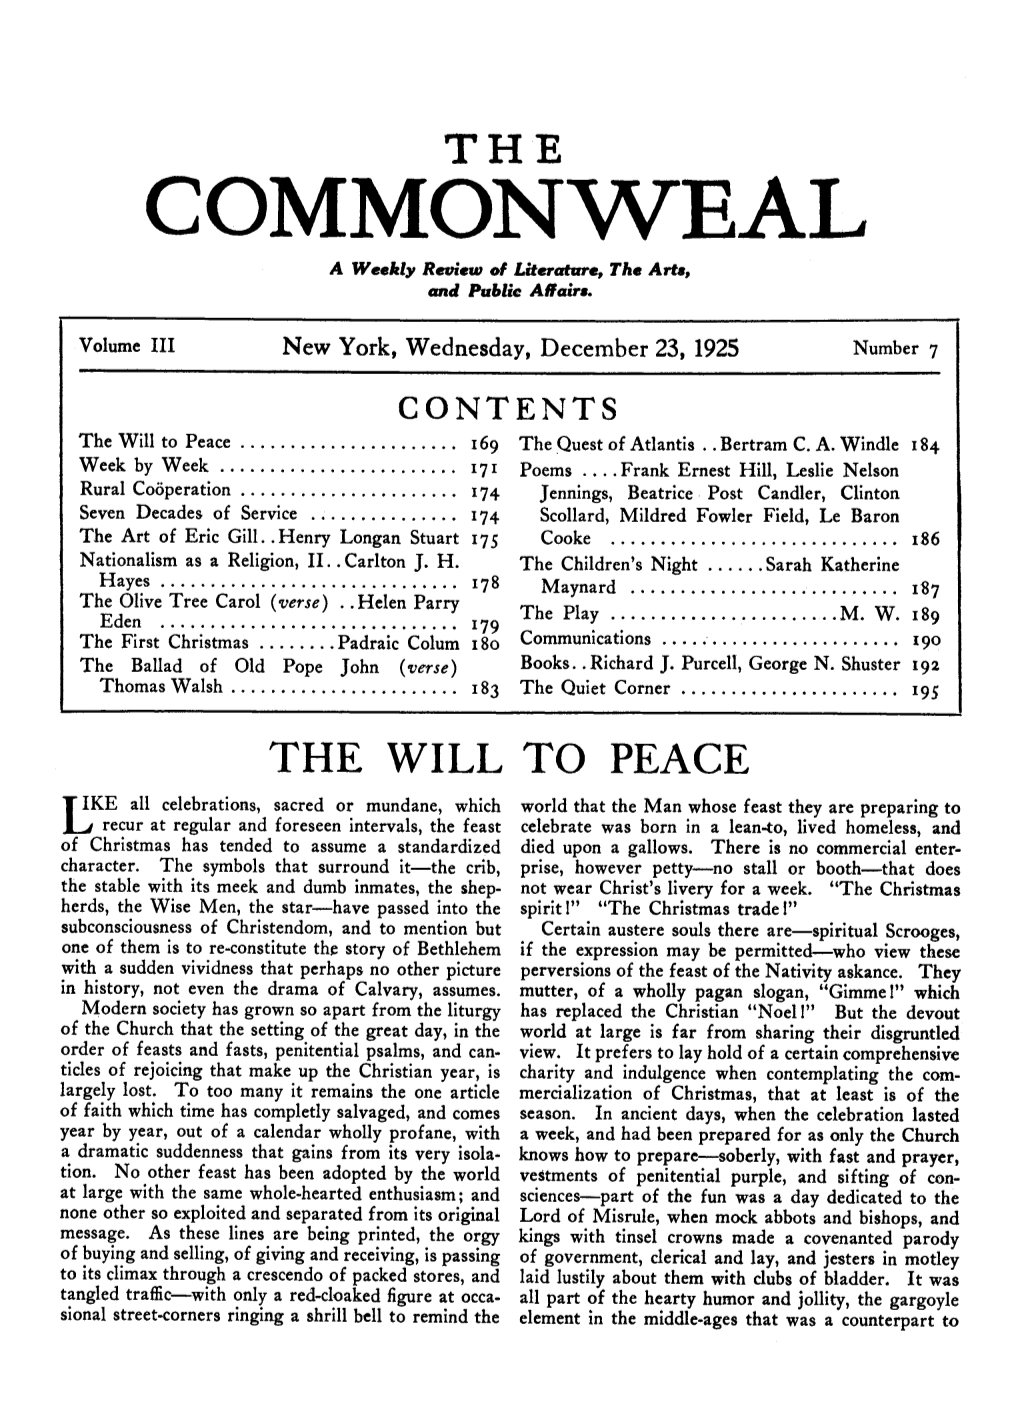 The Will to Peace